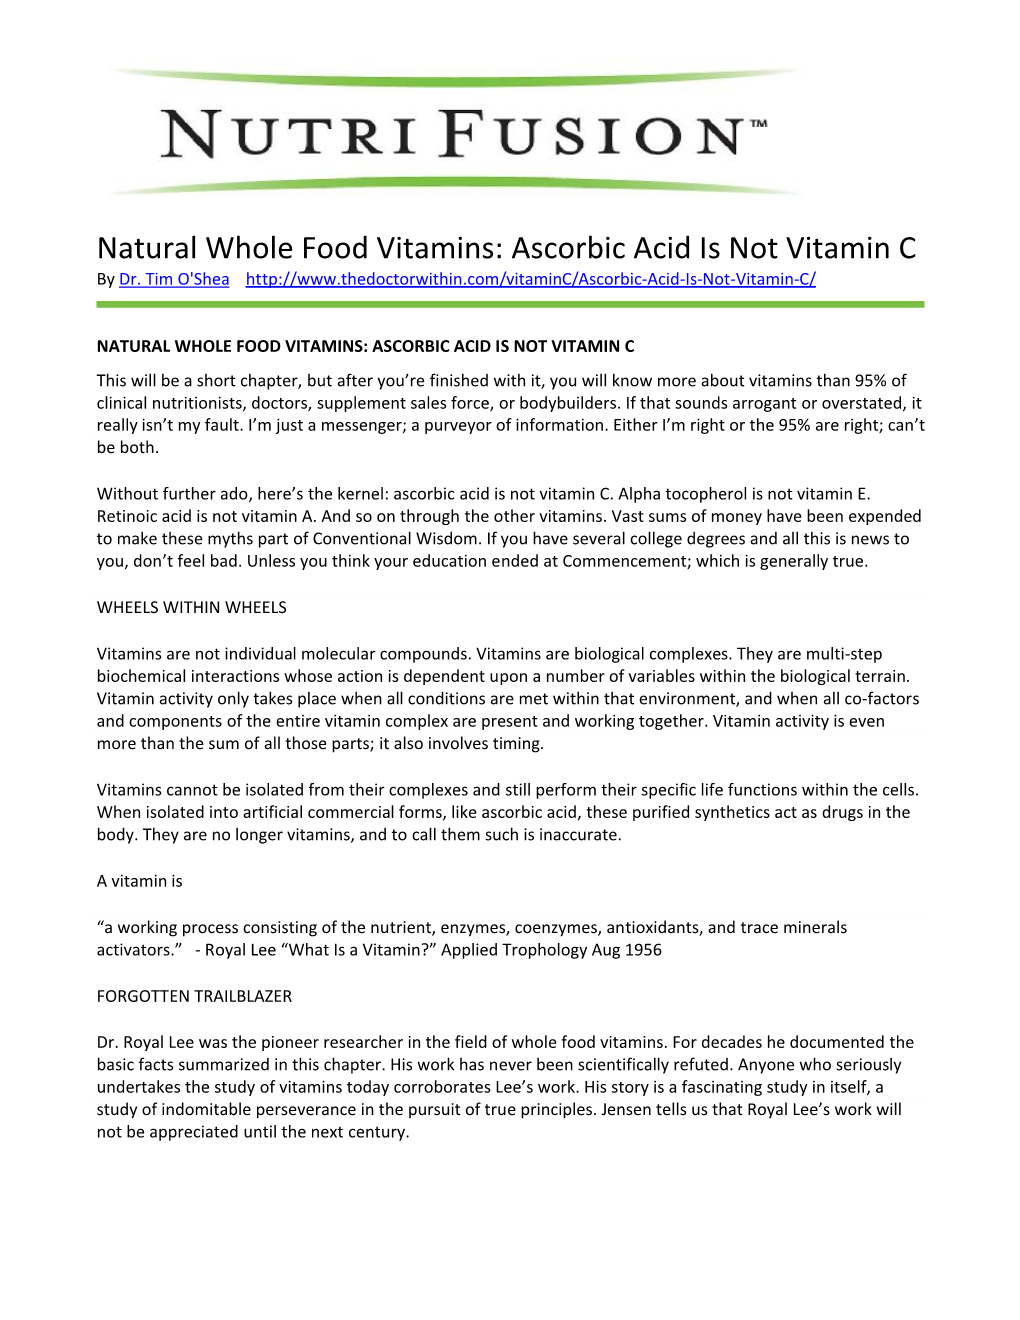 Natural Whole Food Vitamins: Ascorbic Acid Is Not Vitamin C by Dr